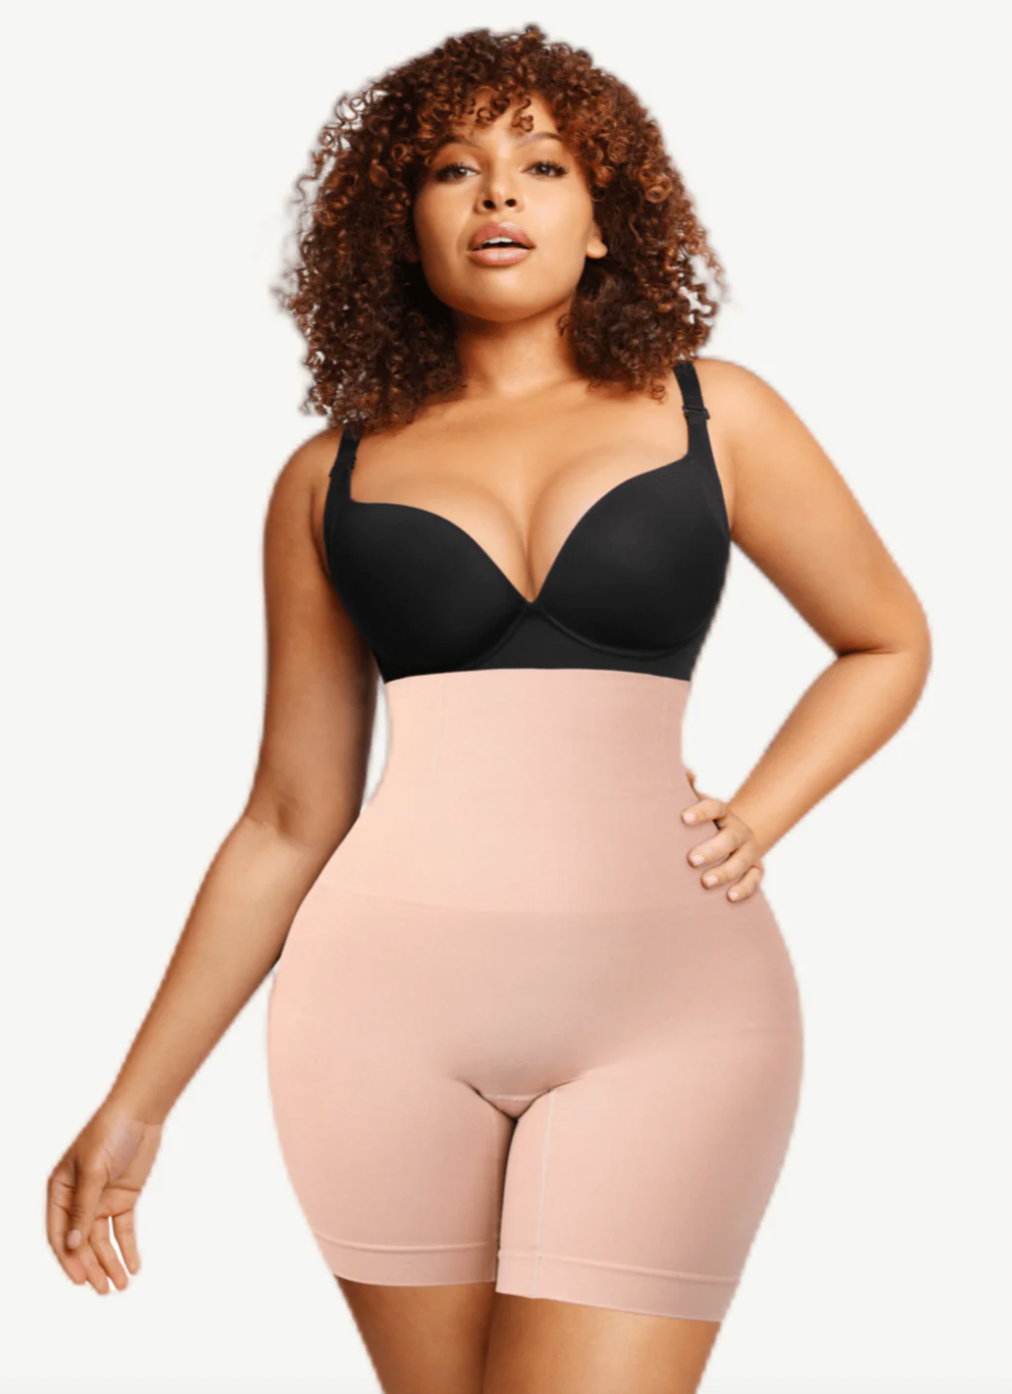 Strapless Shapewear with boning rodes to stay up